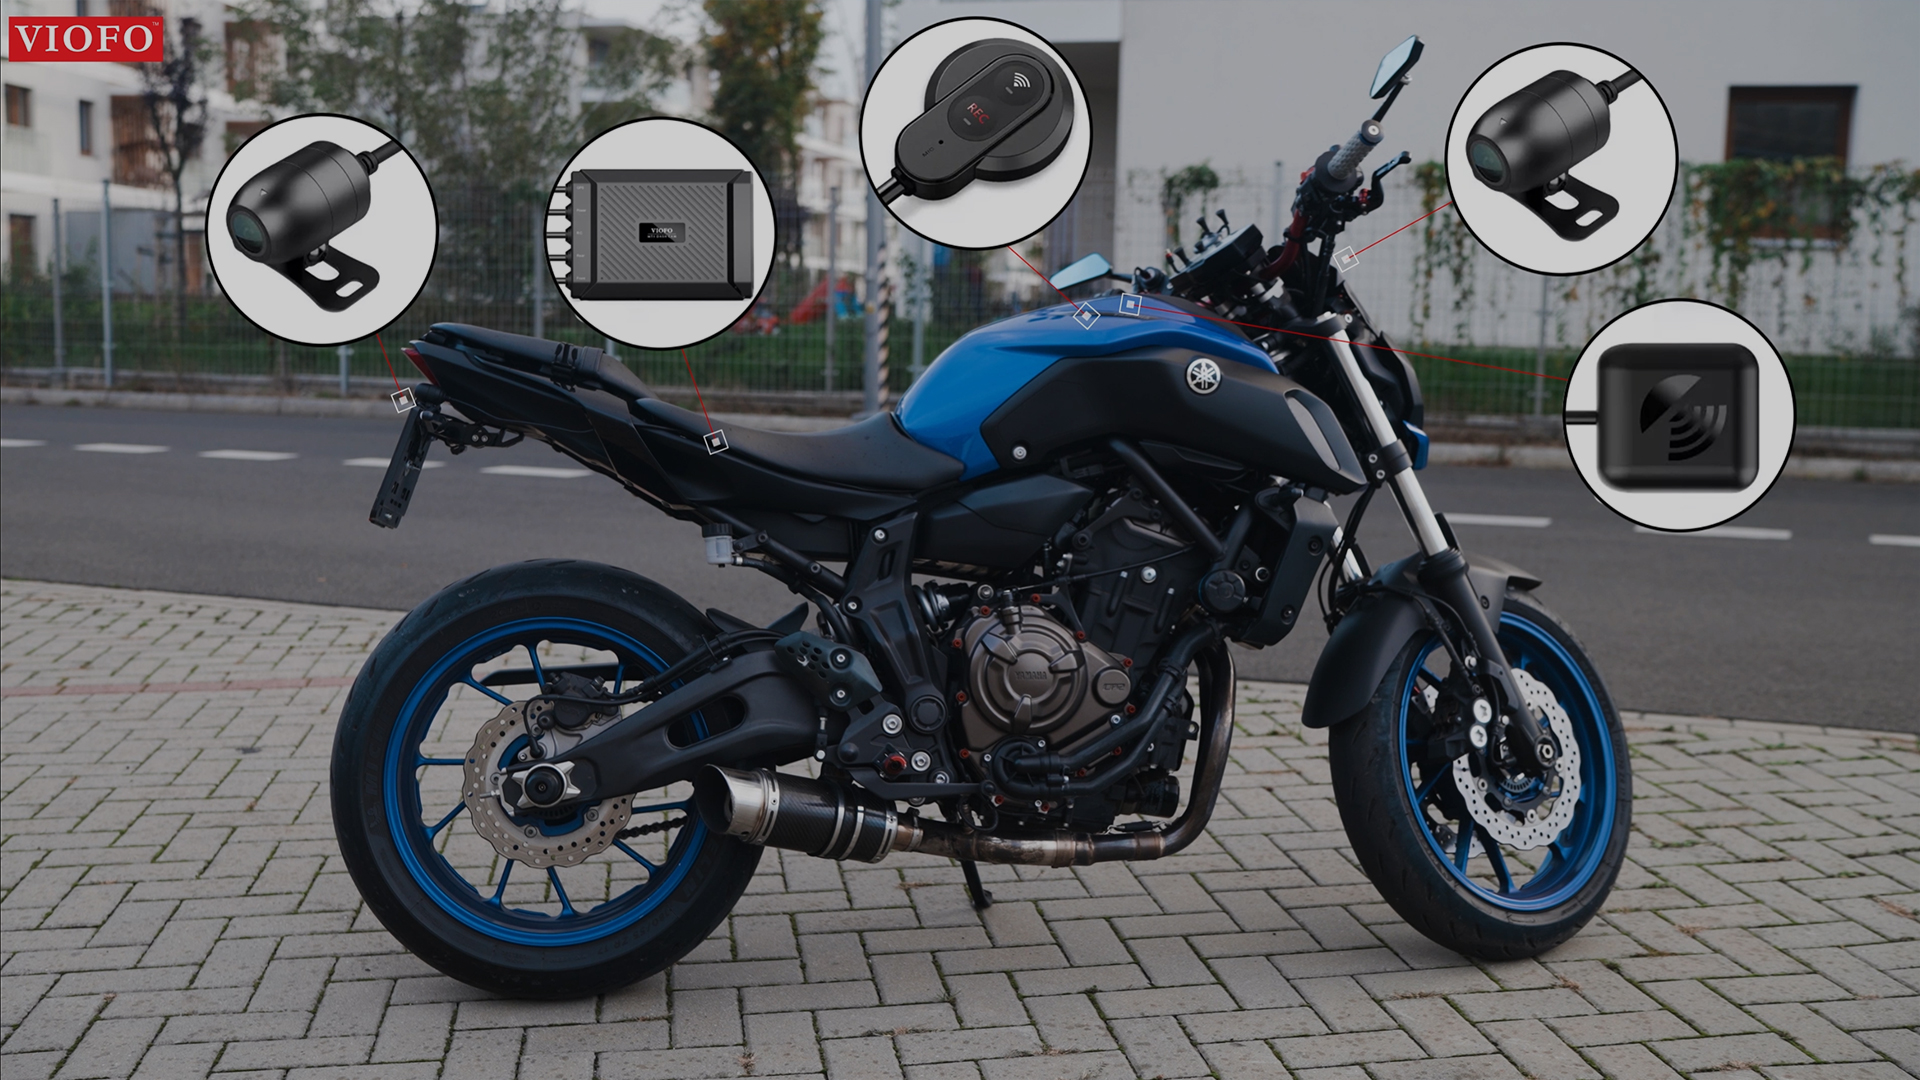 Tested: Viofo MT1 motorcycle dash cam review